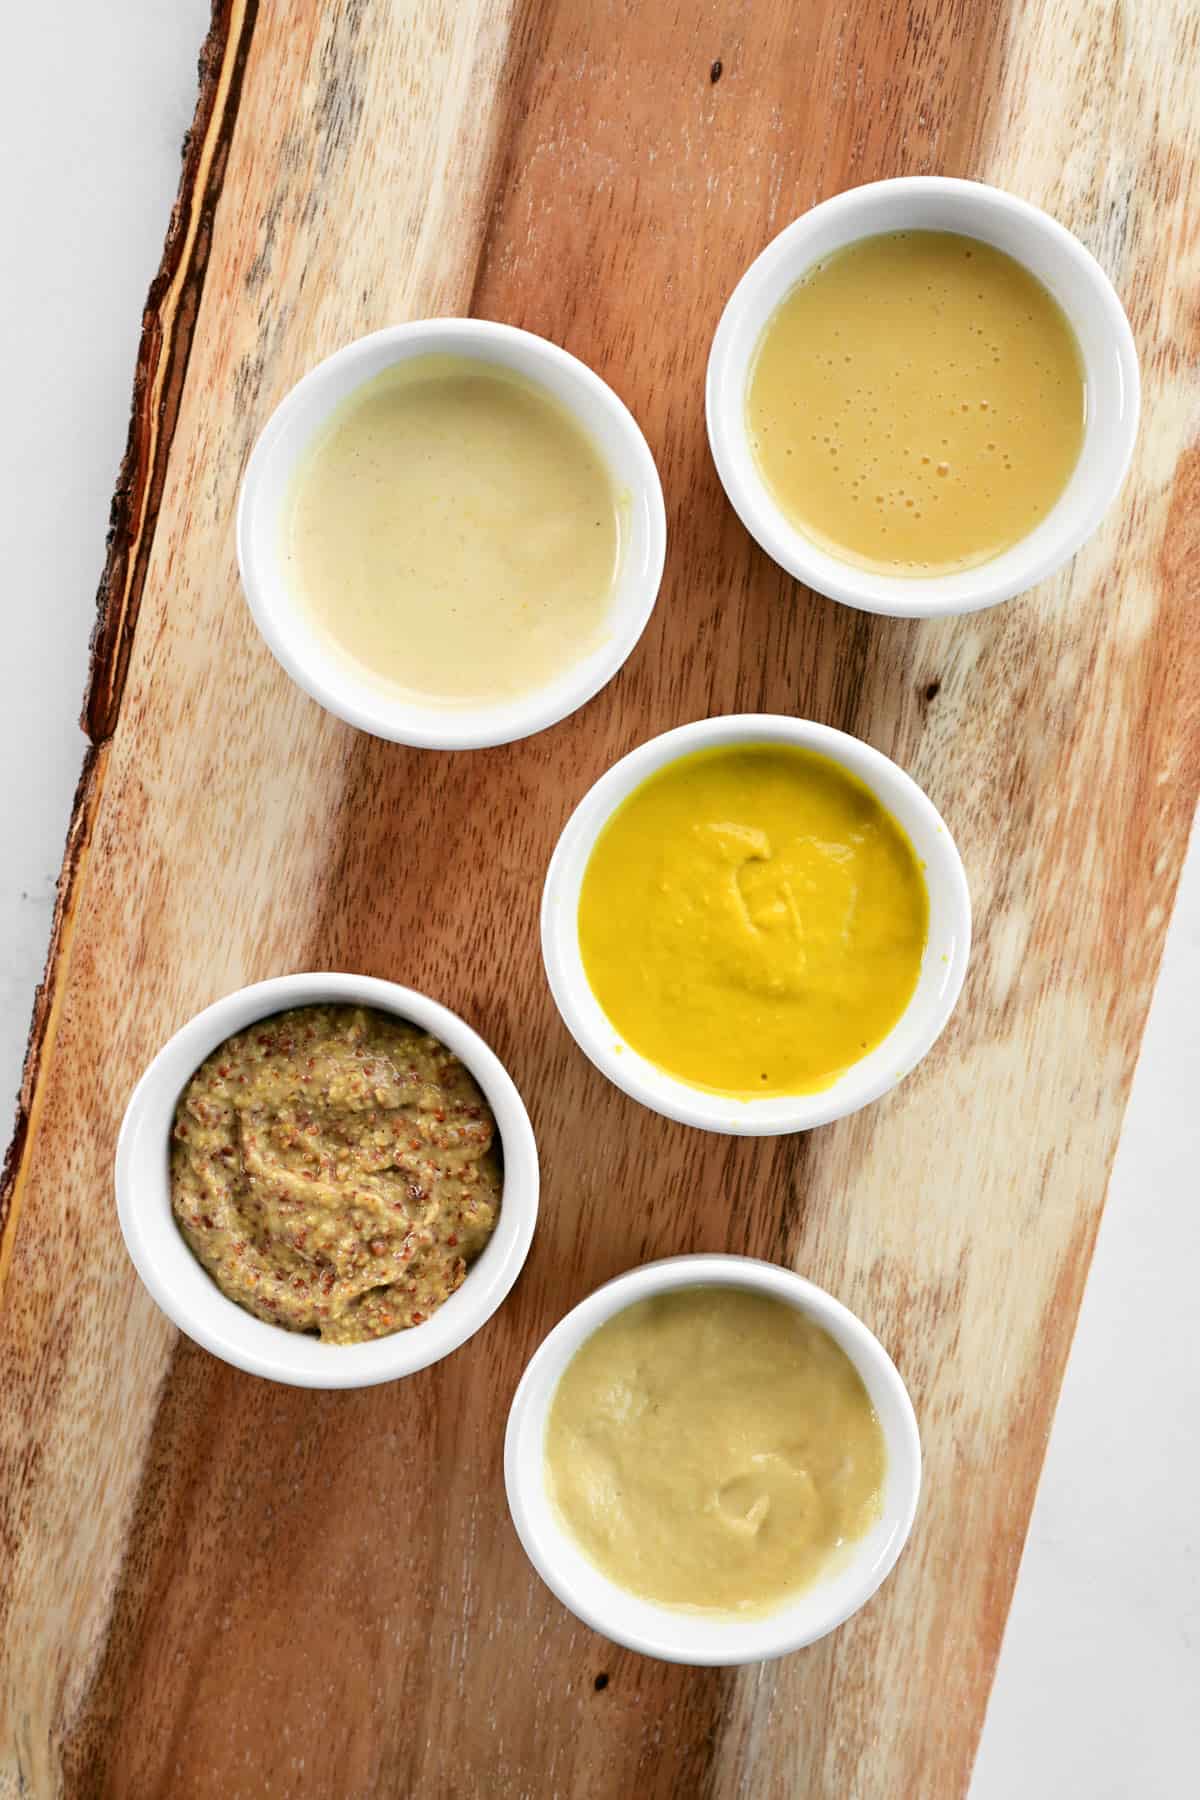 Five Dijon mustard substitutes in small bowls on a wooden cutting board.